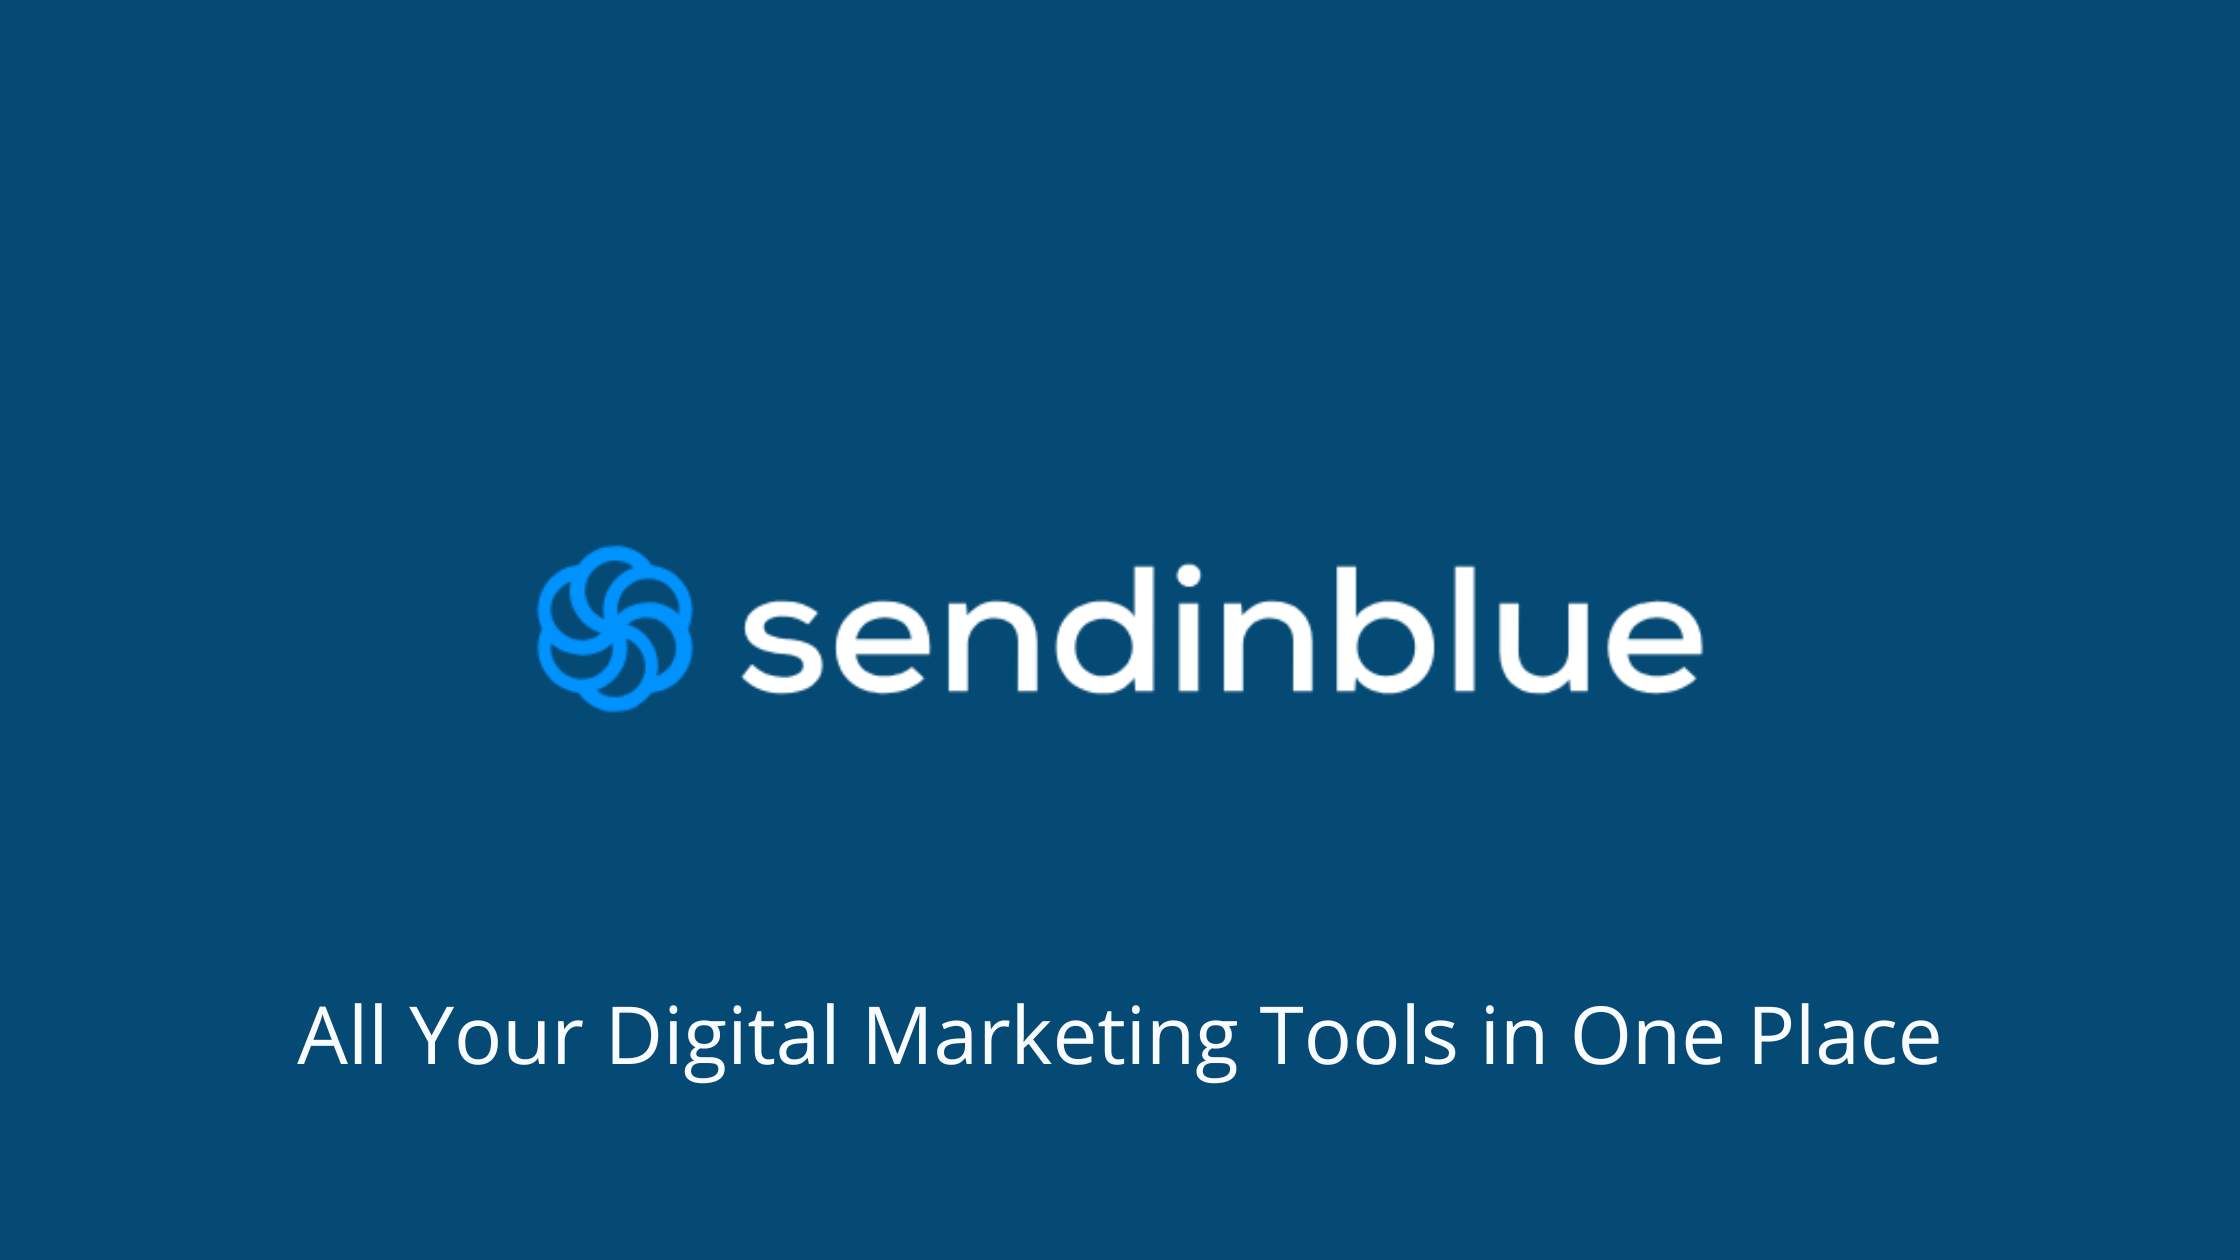 All Your Digital Marketing Tools in One Place